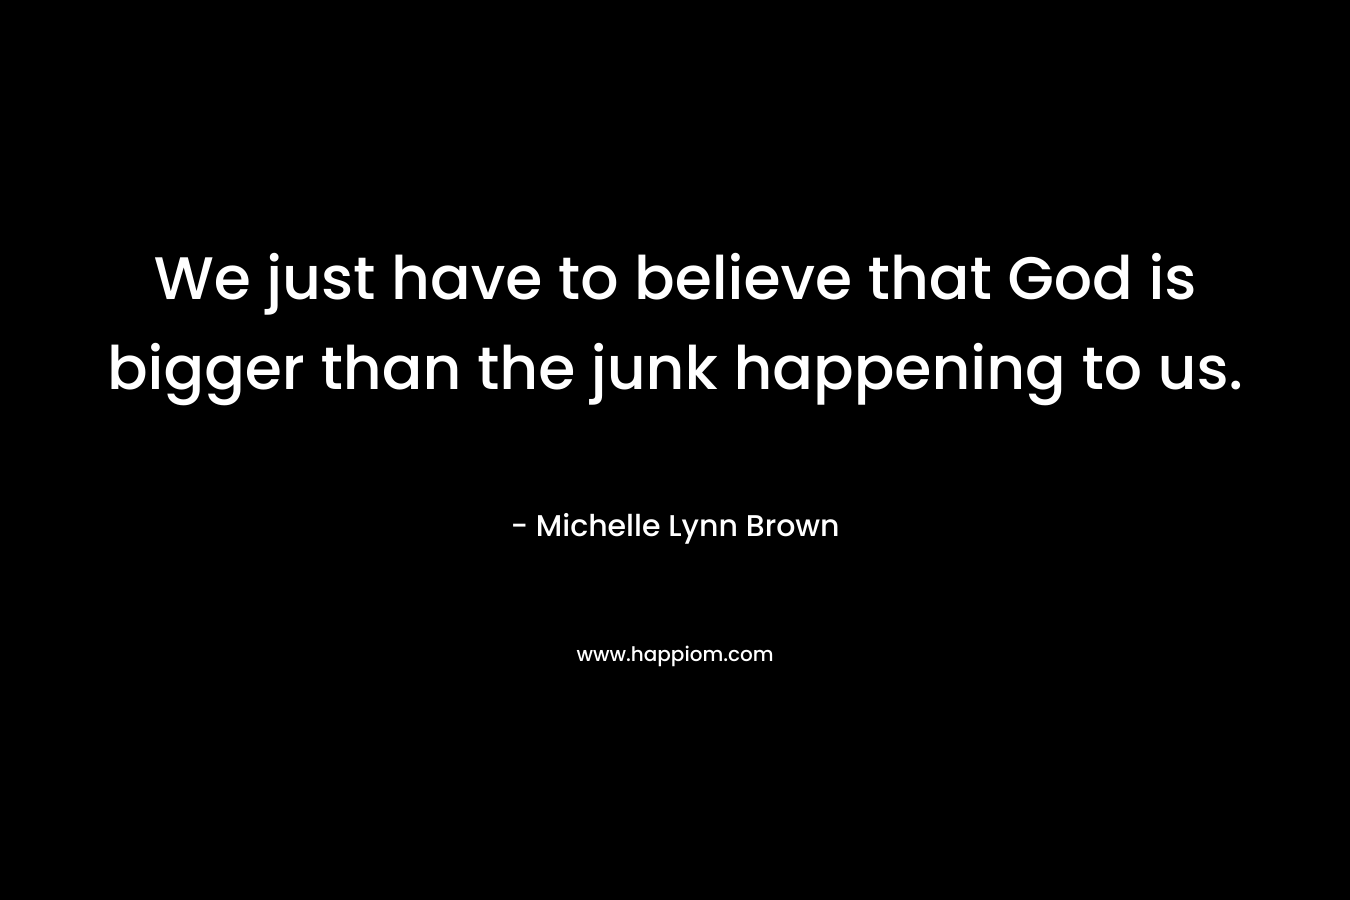 We just have to believe that God is bigger than the junk happening to us. – Michelle Lynn Brown